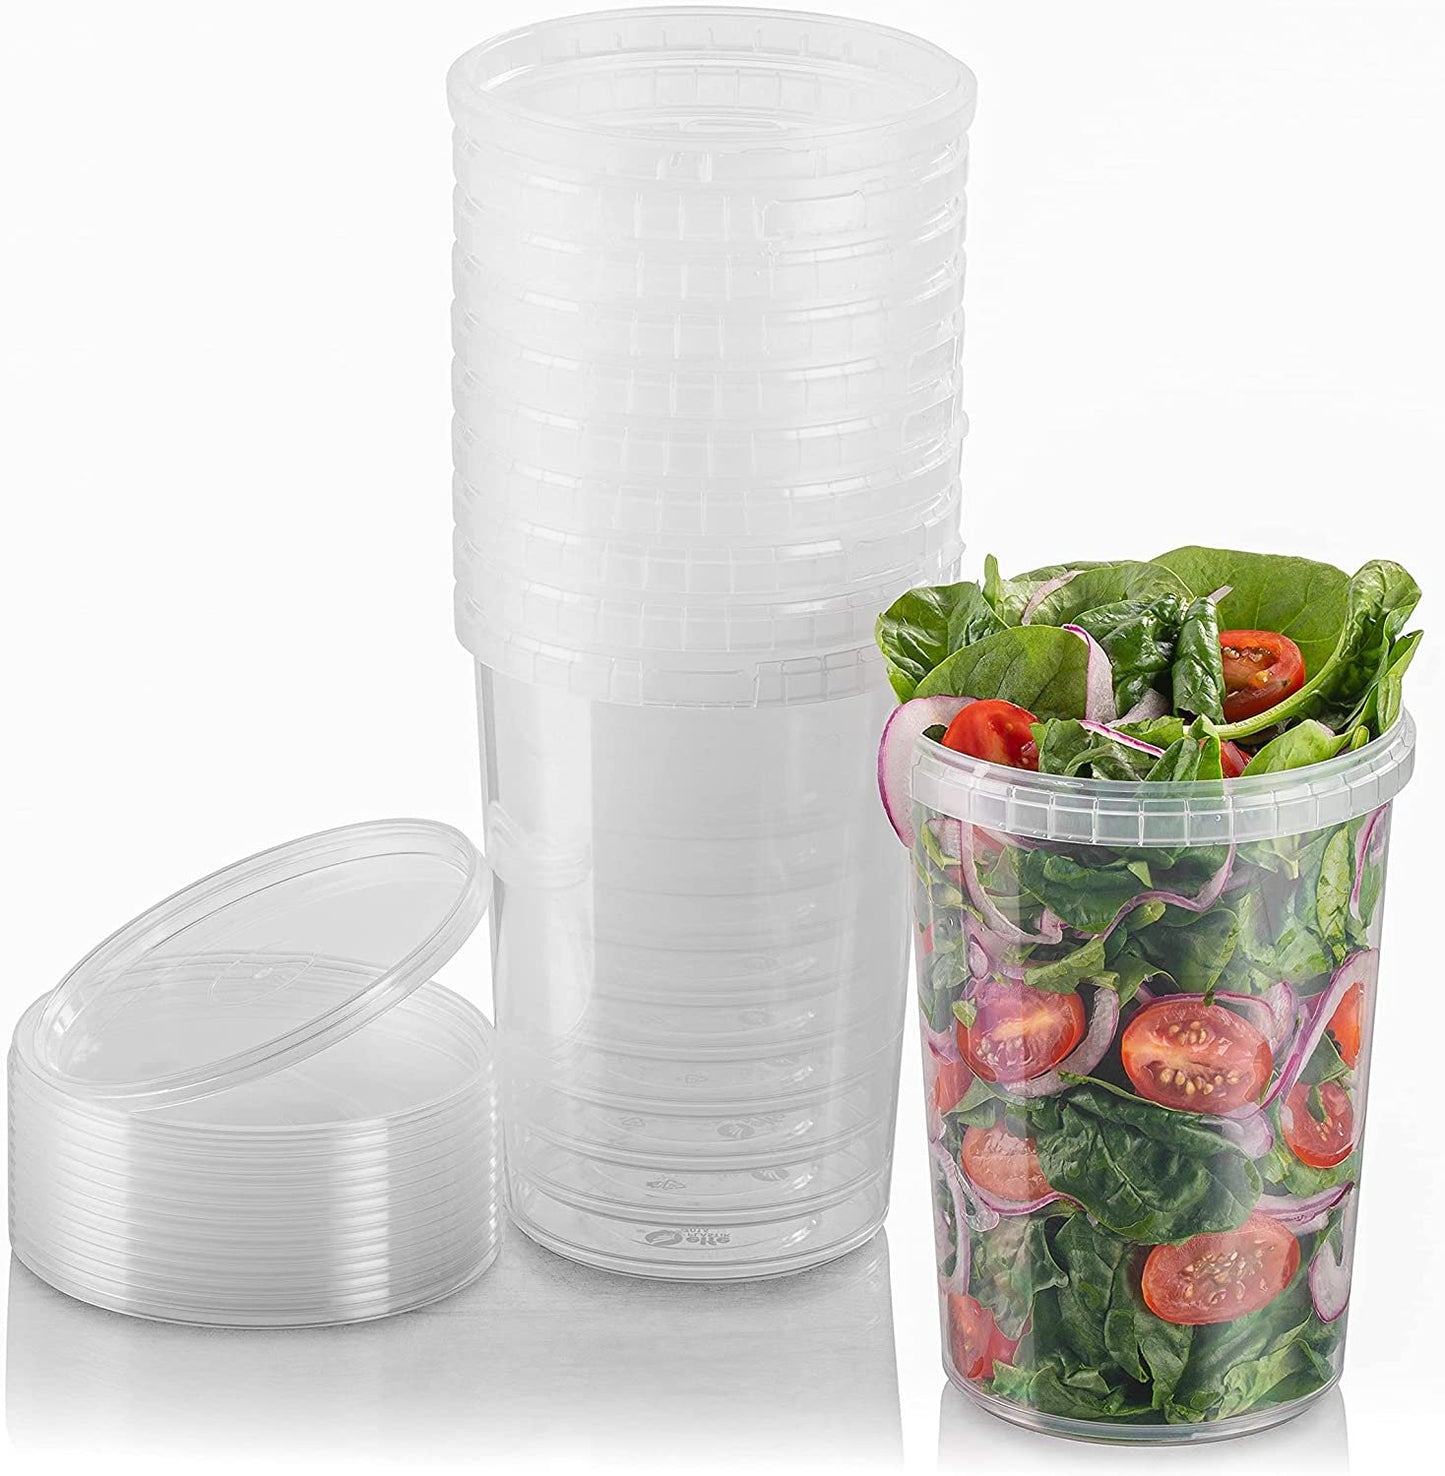 NYHI 16-oz. Square Clear Deli Containers with Lids | Stackable, Tamper-Proof BPA-Free Food Storage Containers | Recyclable Space